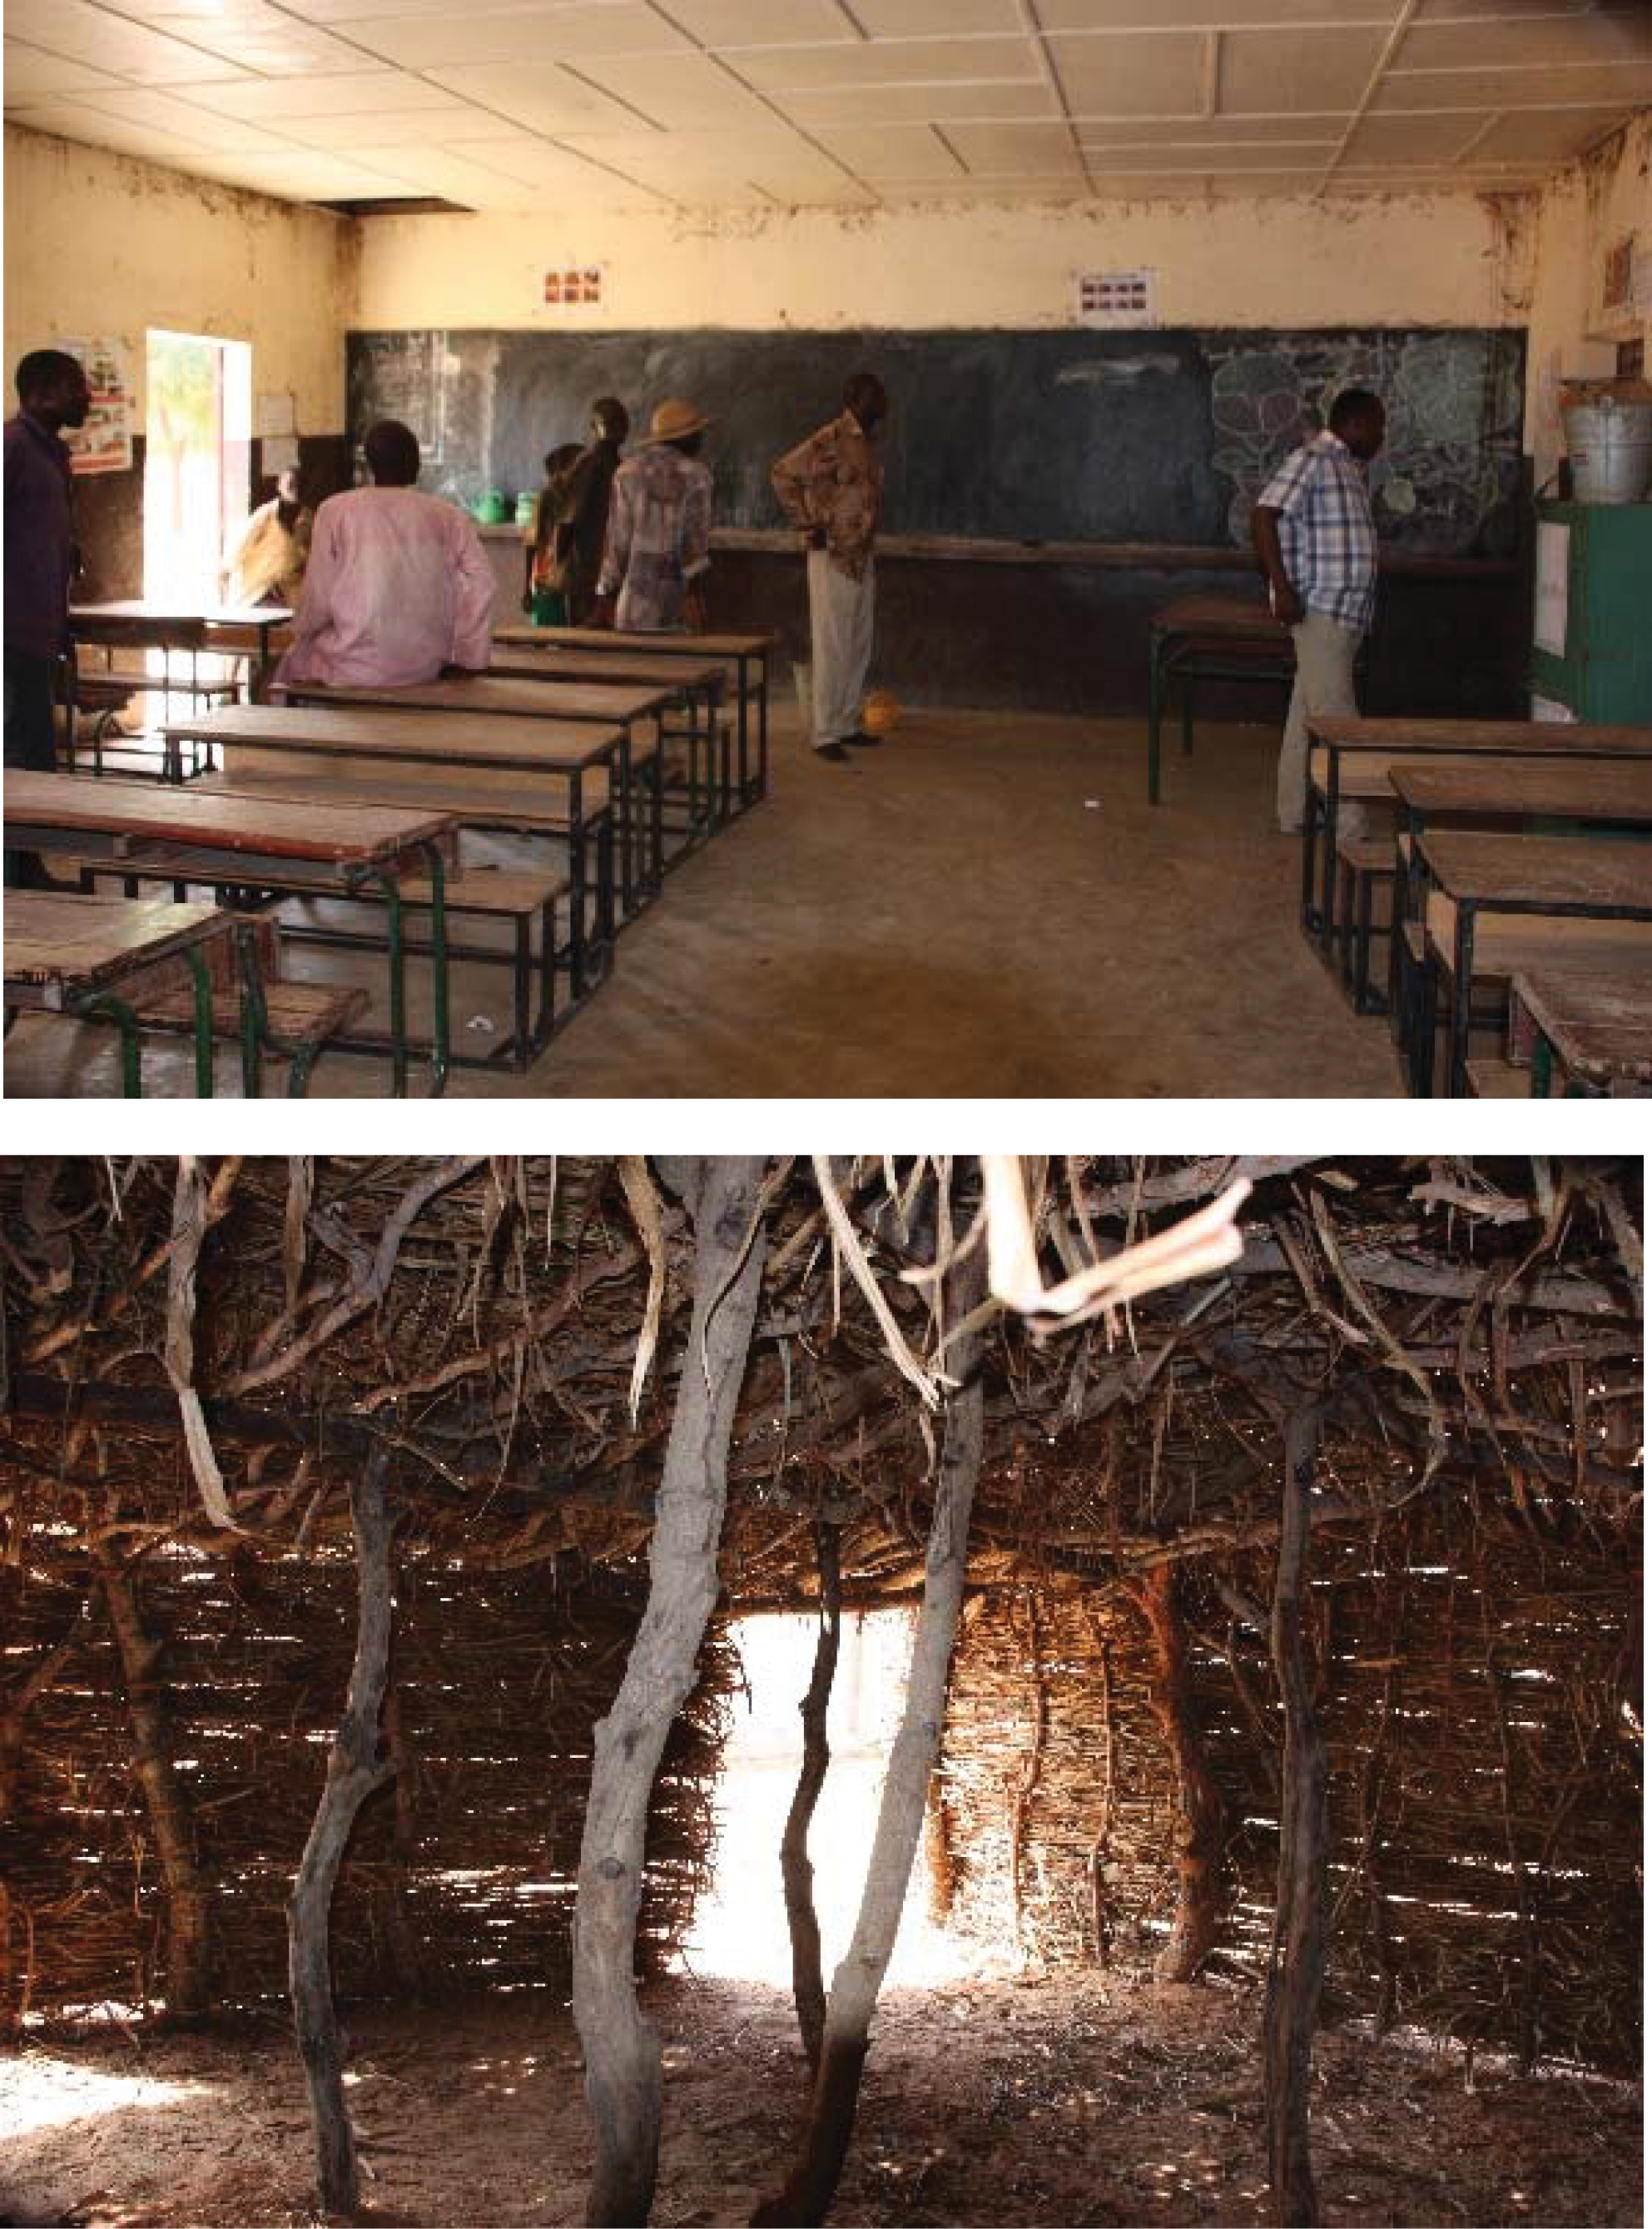 control classrooms constructed of natural materials and treatment classrooms were constructed with higher quality building standards